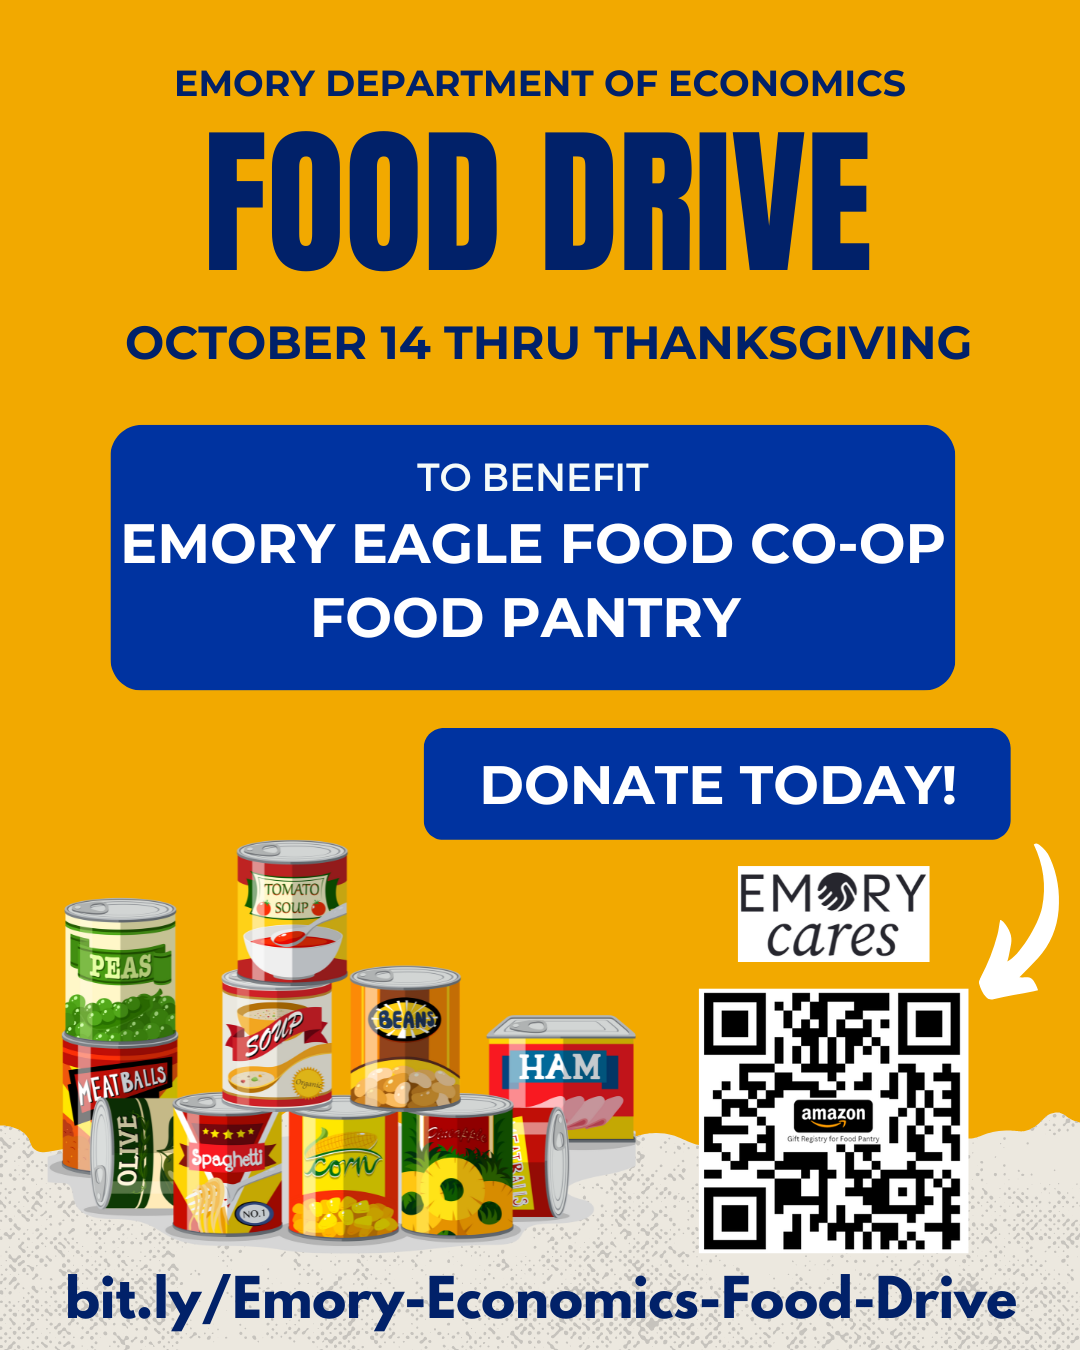 Food Drive to support Emory Eagle Food Co-op Food Pantry